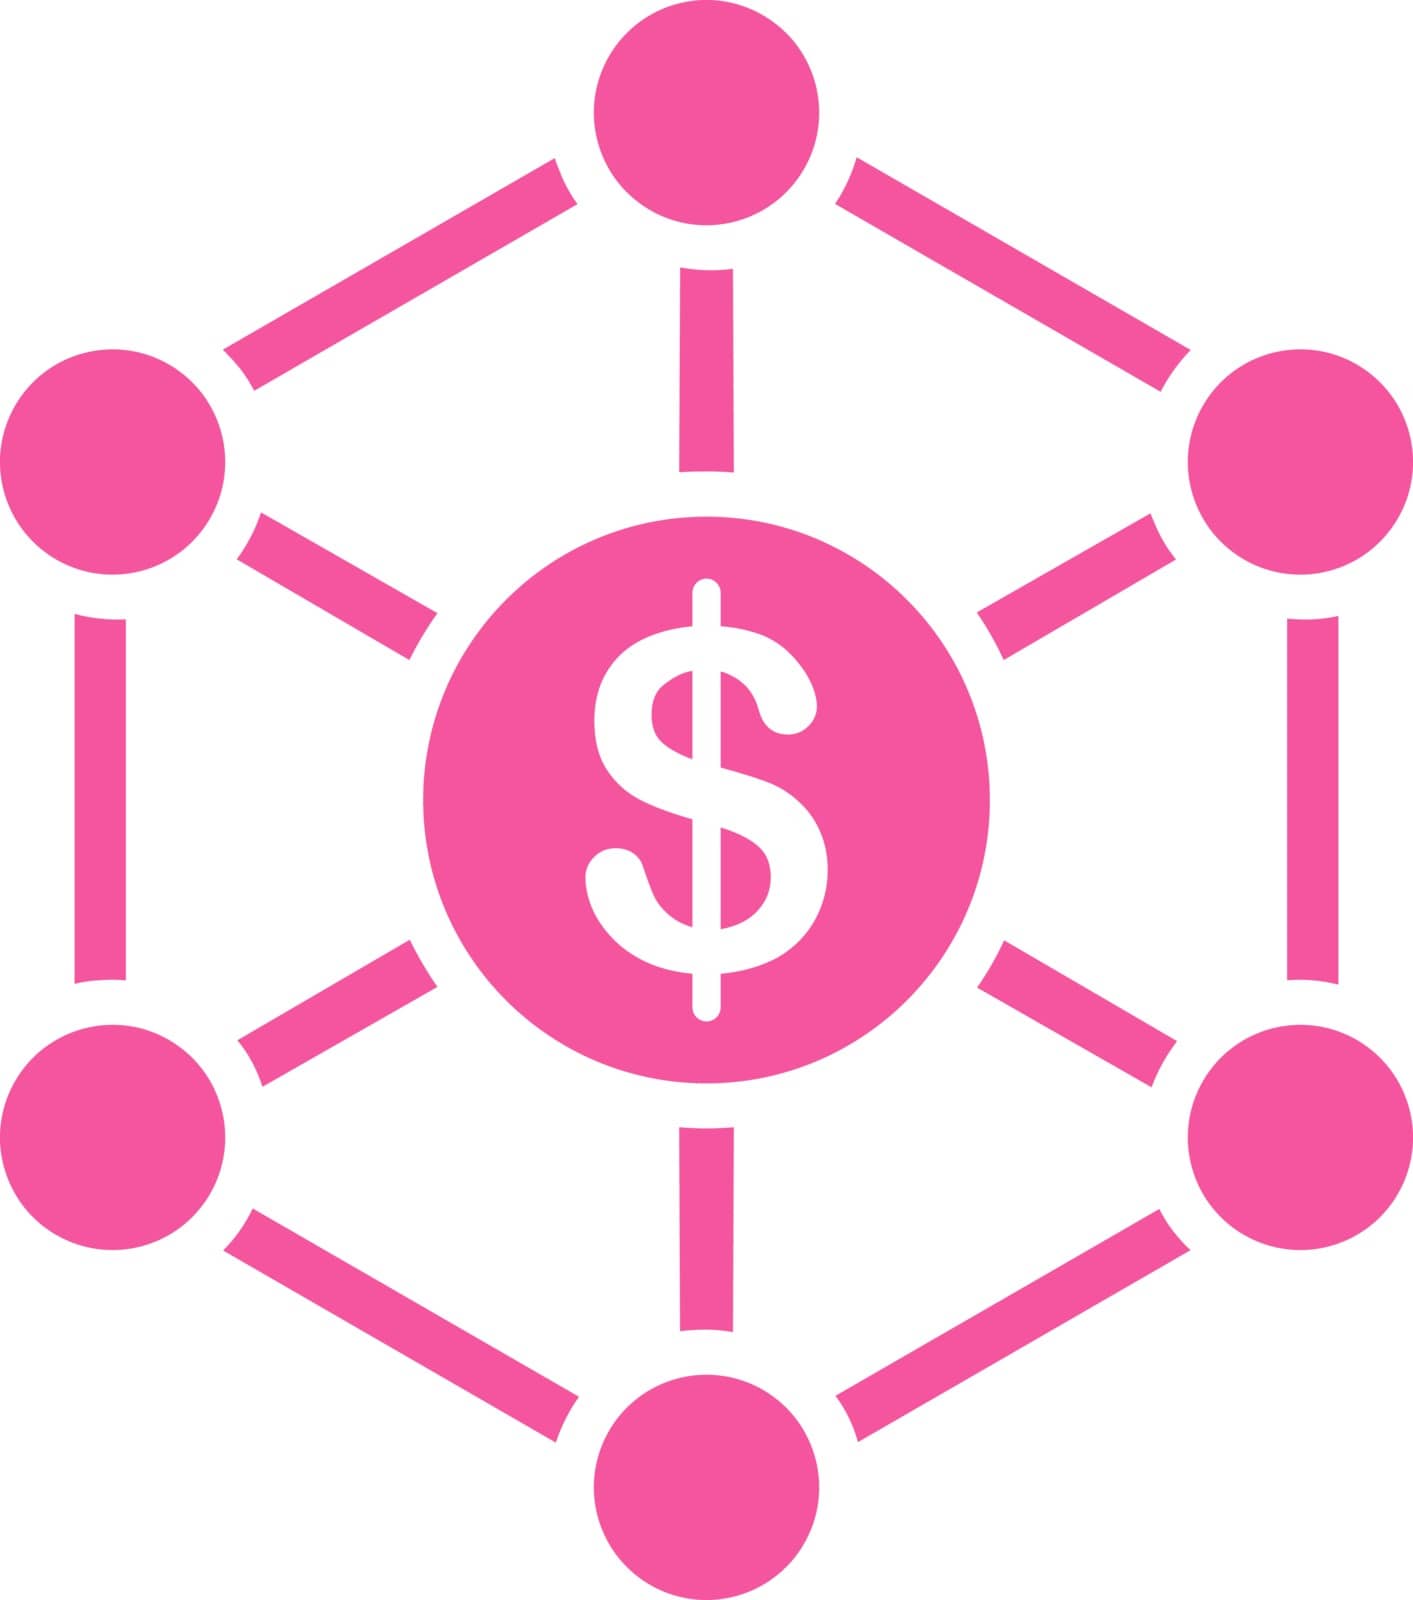 Scheme icon. This flat vector symbol uses pink color, rounded angles, and isolated on a white background.